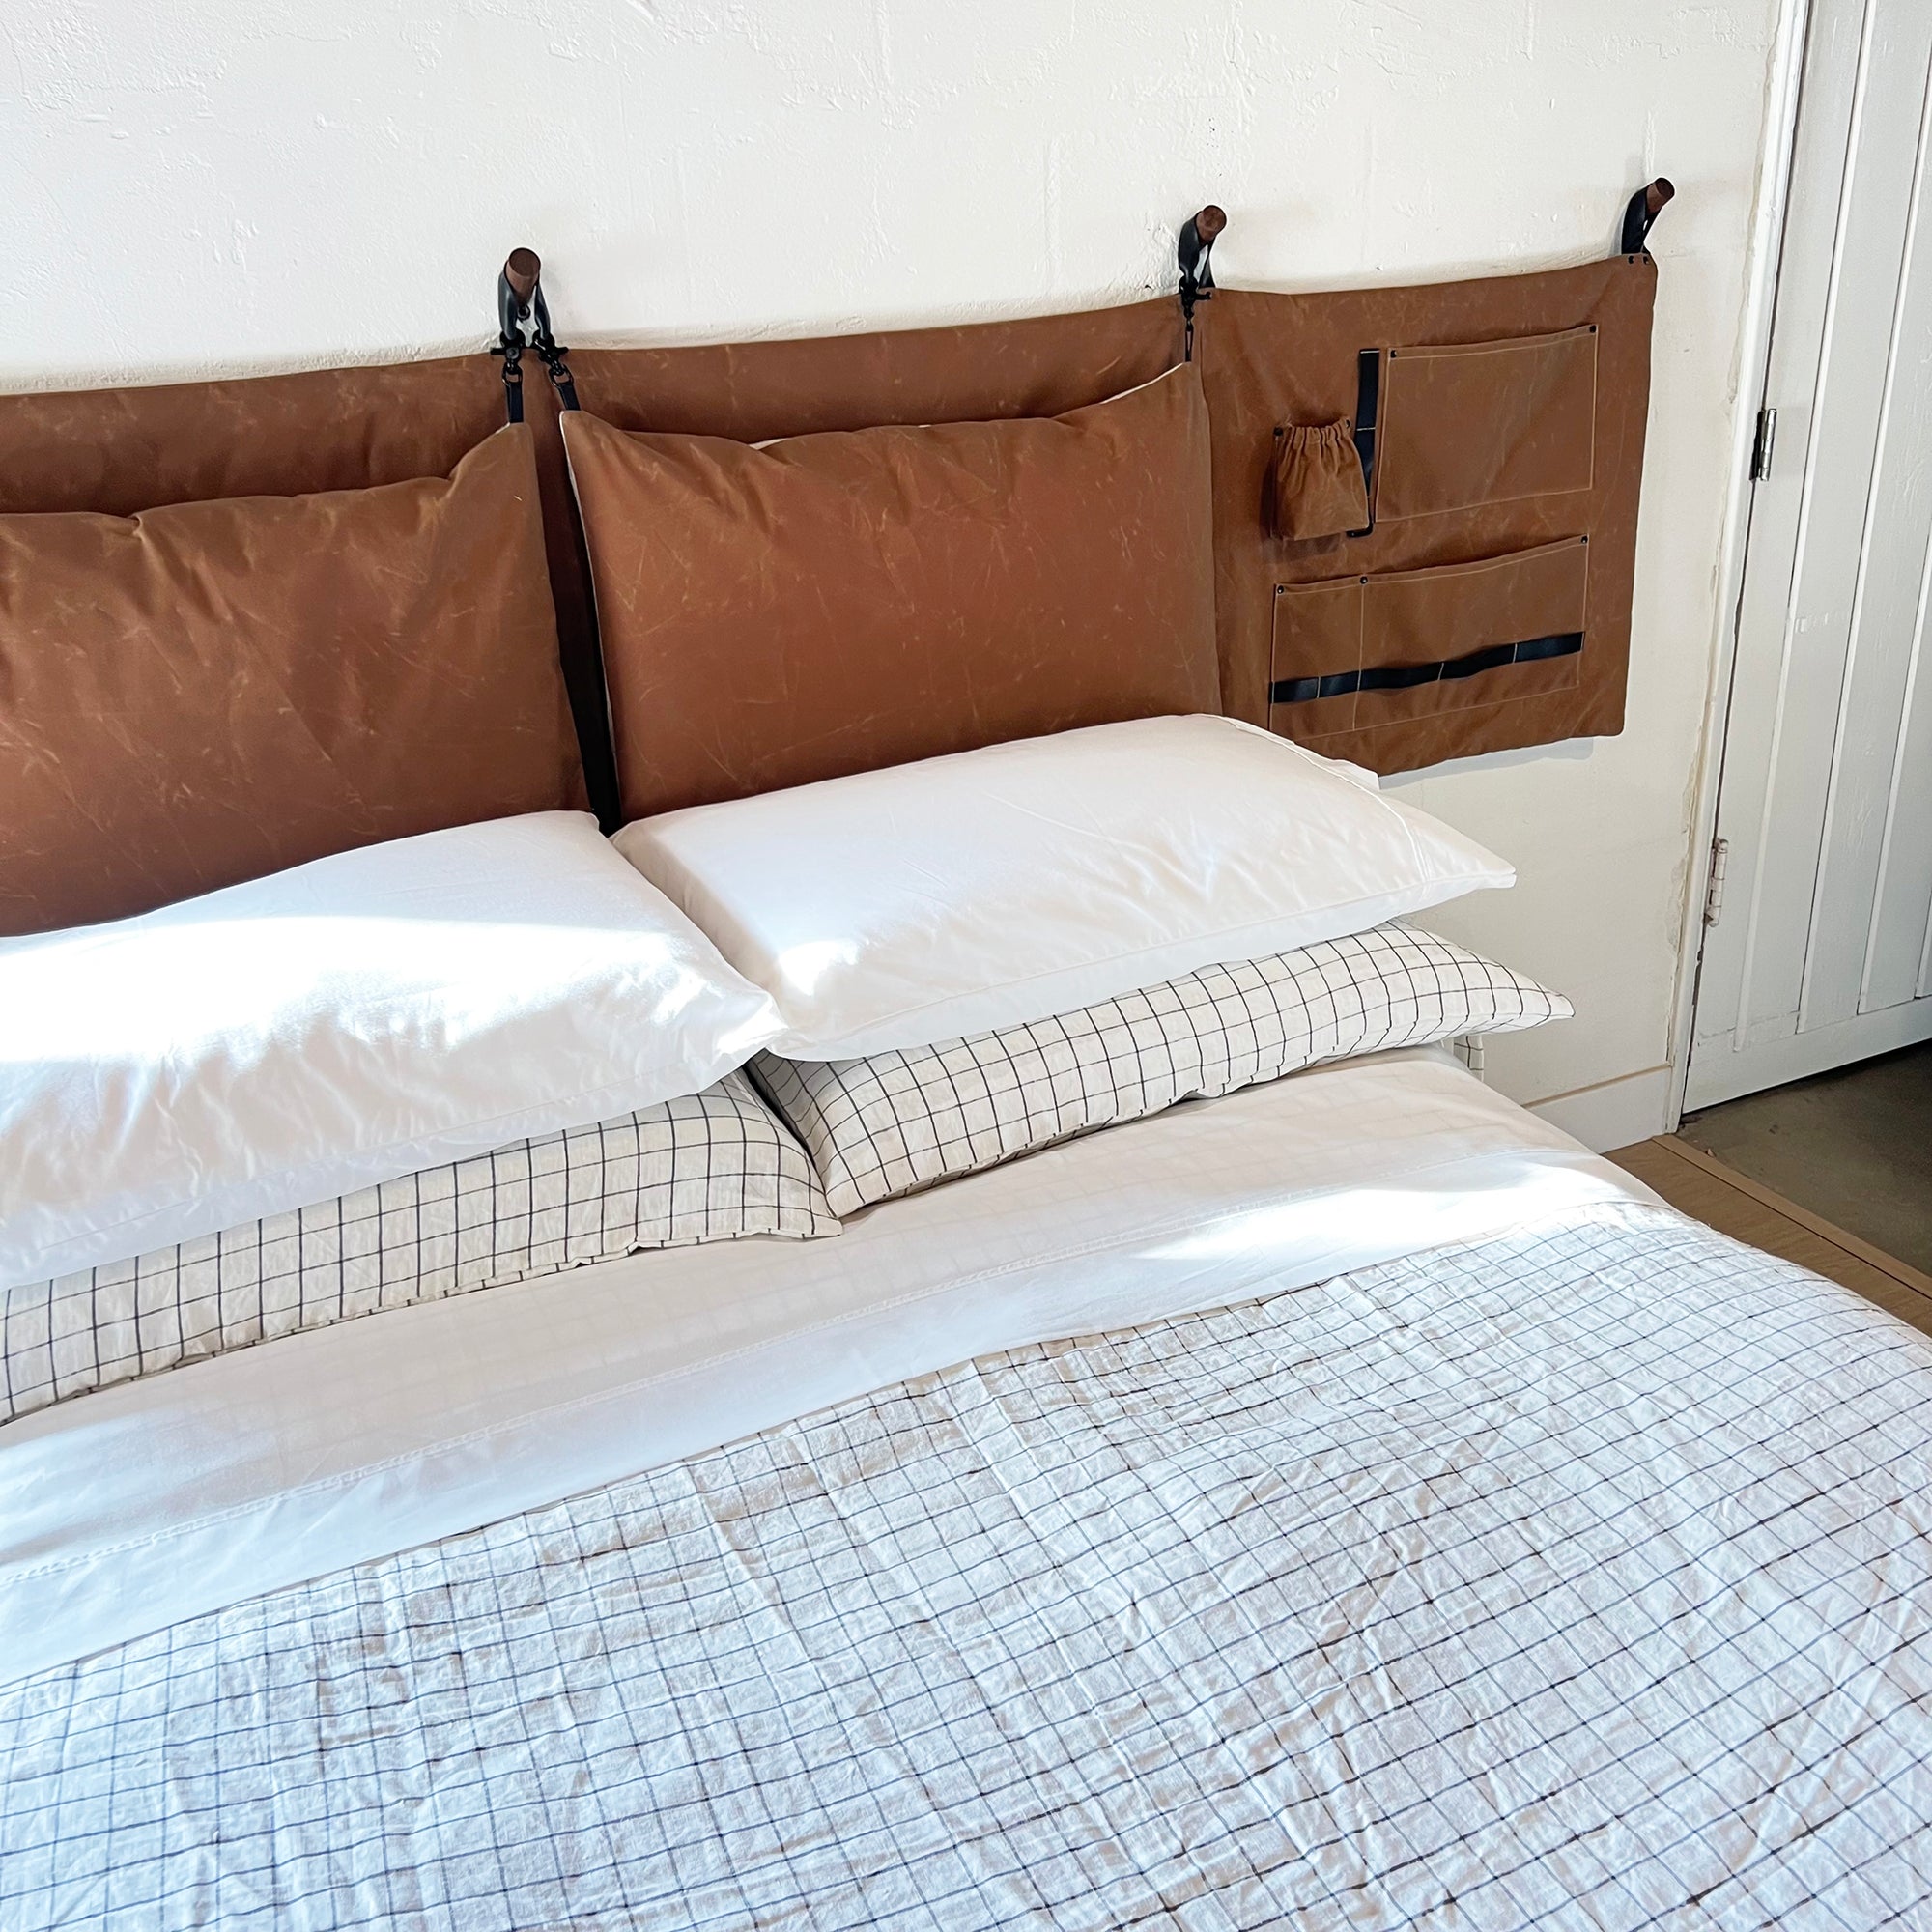 Clean photo of a made bed with linen sheets and a brown waxed cotton canvas headboad hanging on the white wall above the bed. The headboad has black leather and hardware on the side pocket storage panel. 